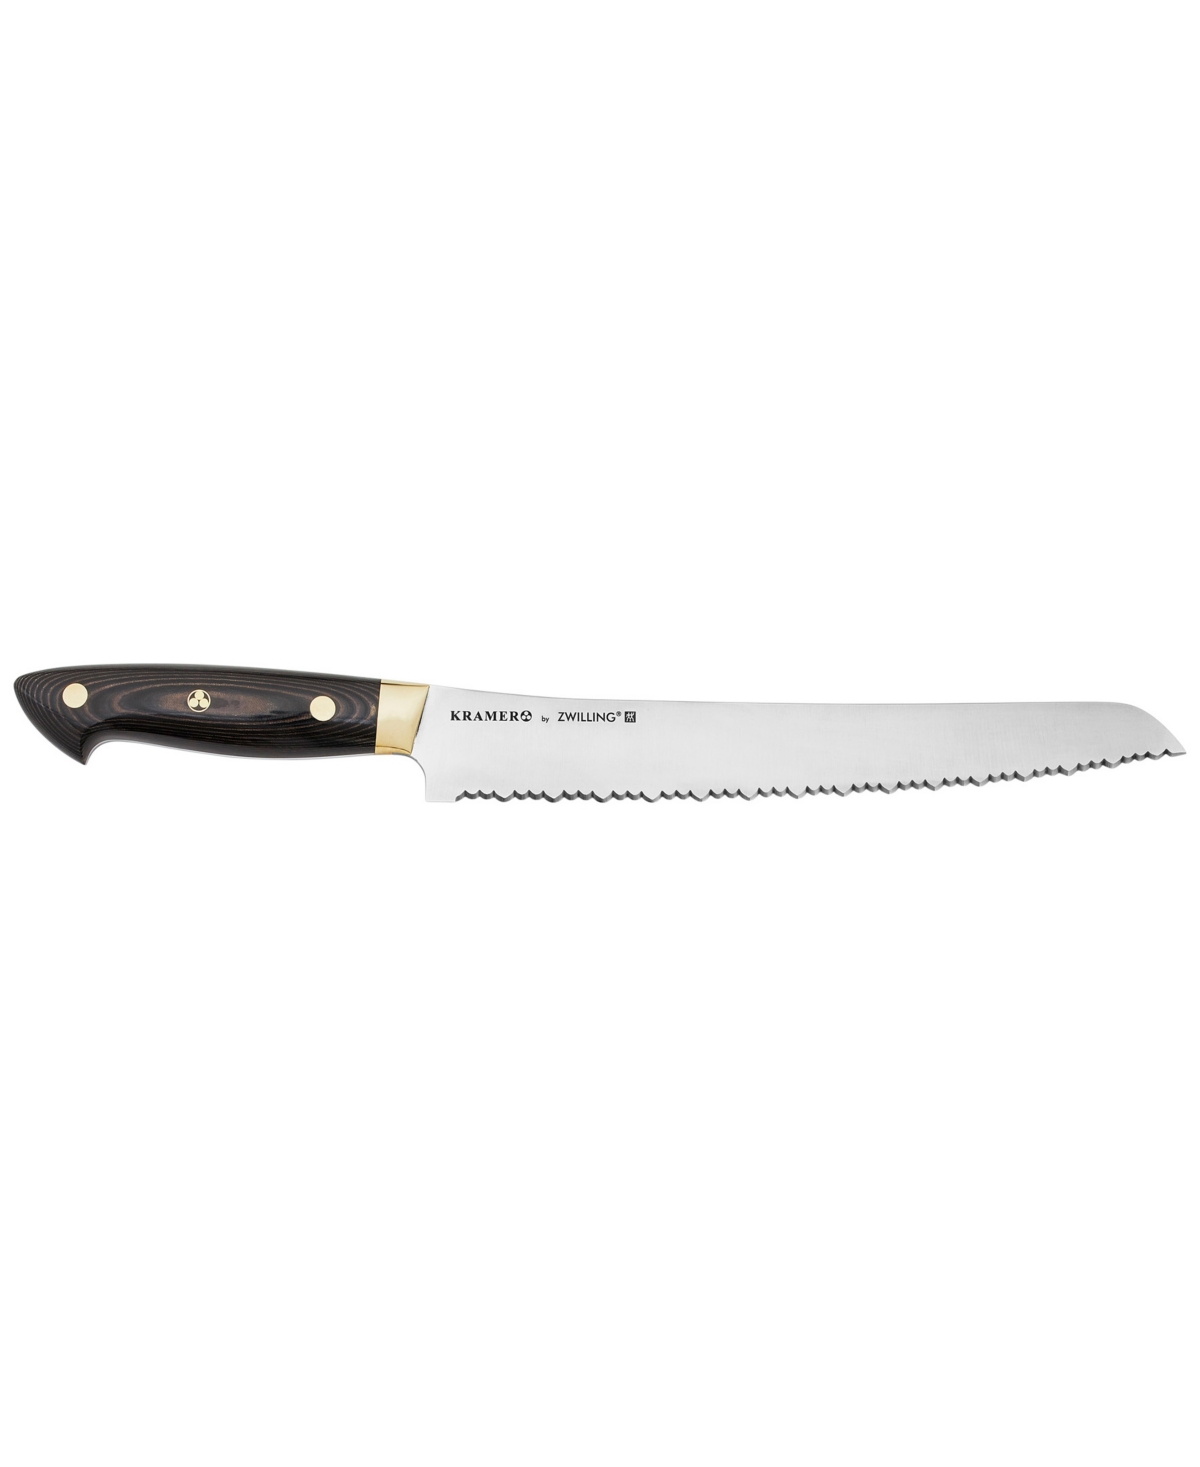 Zwilling Bob Kramer Carbon 2.0 Bread Knife, 10" In Brown And Silver-tone